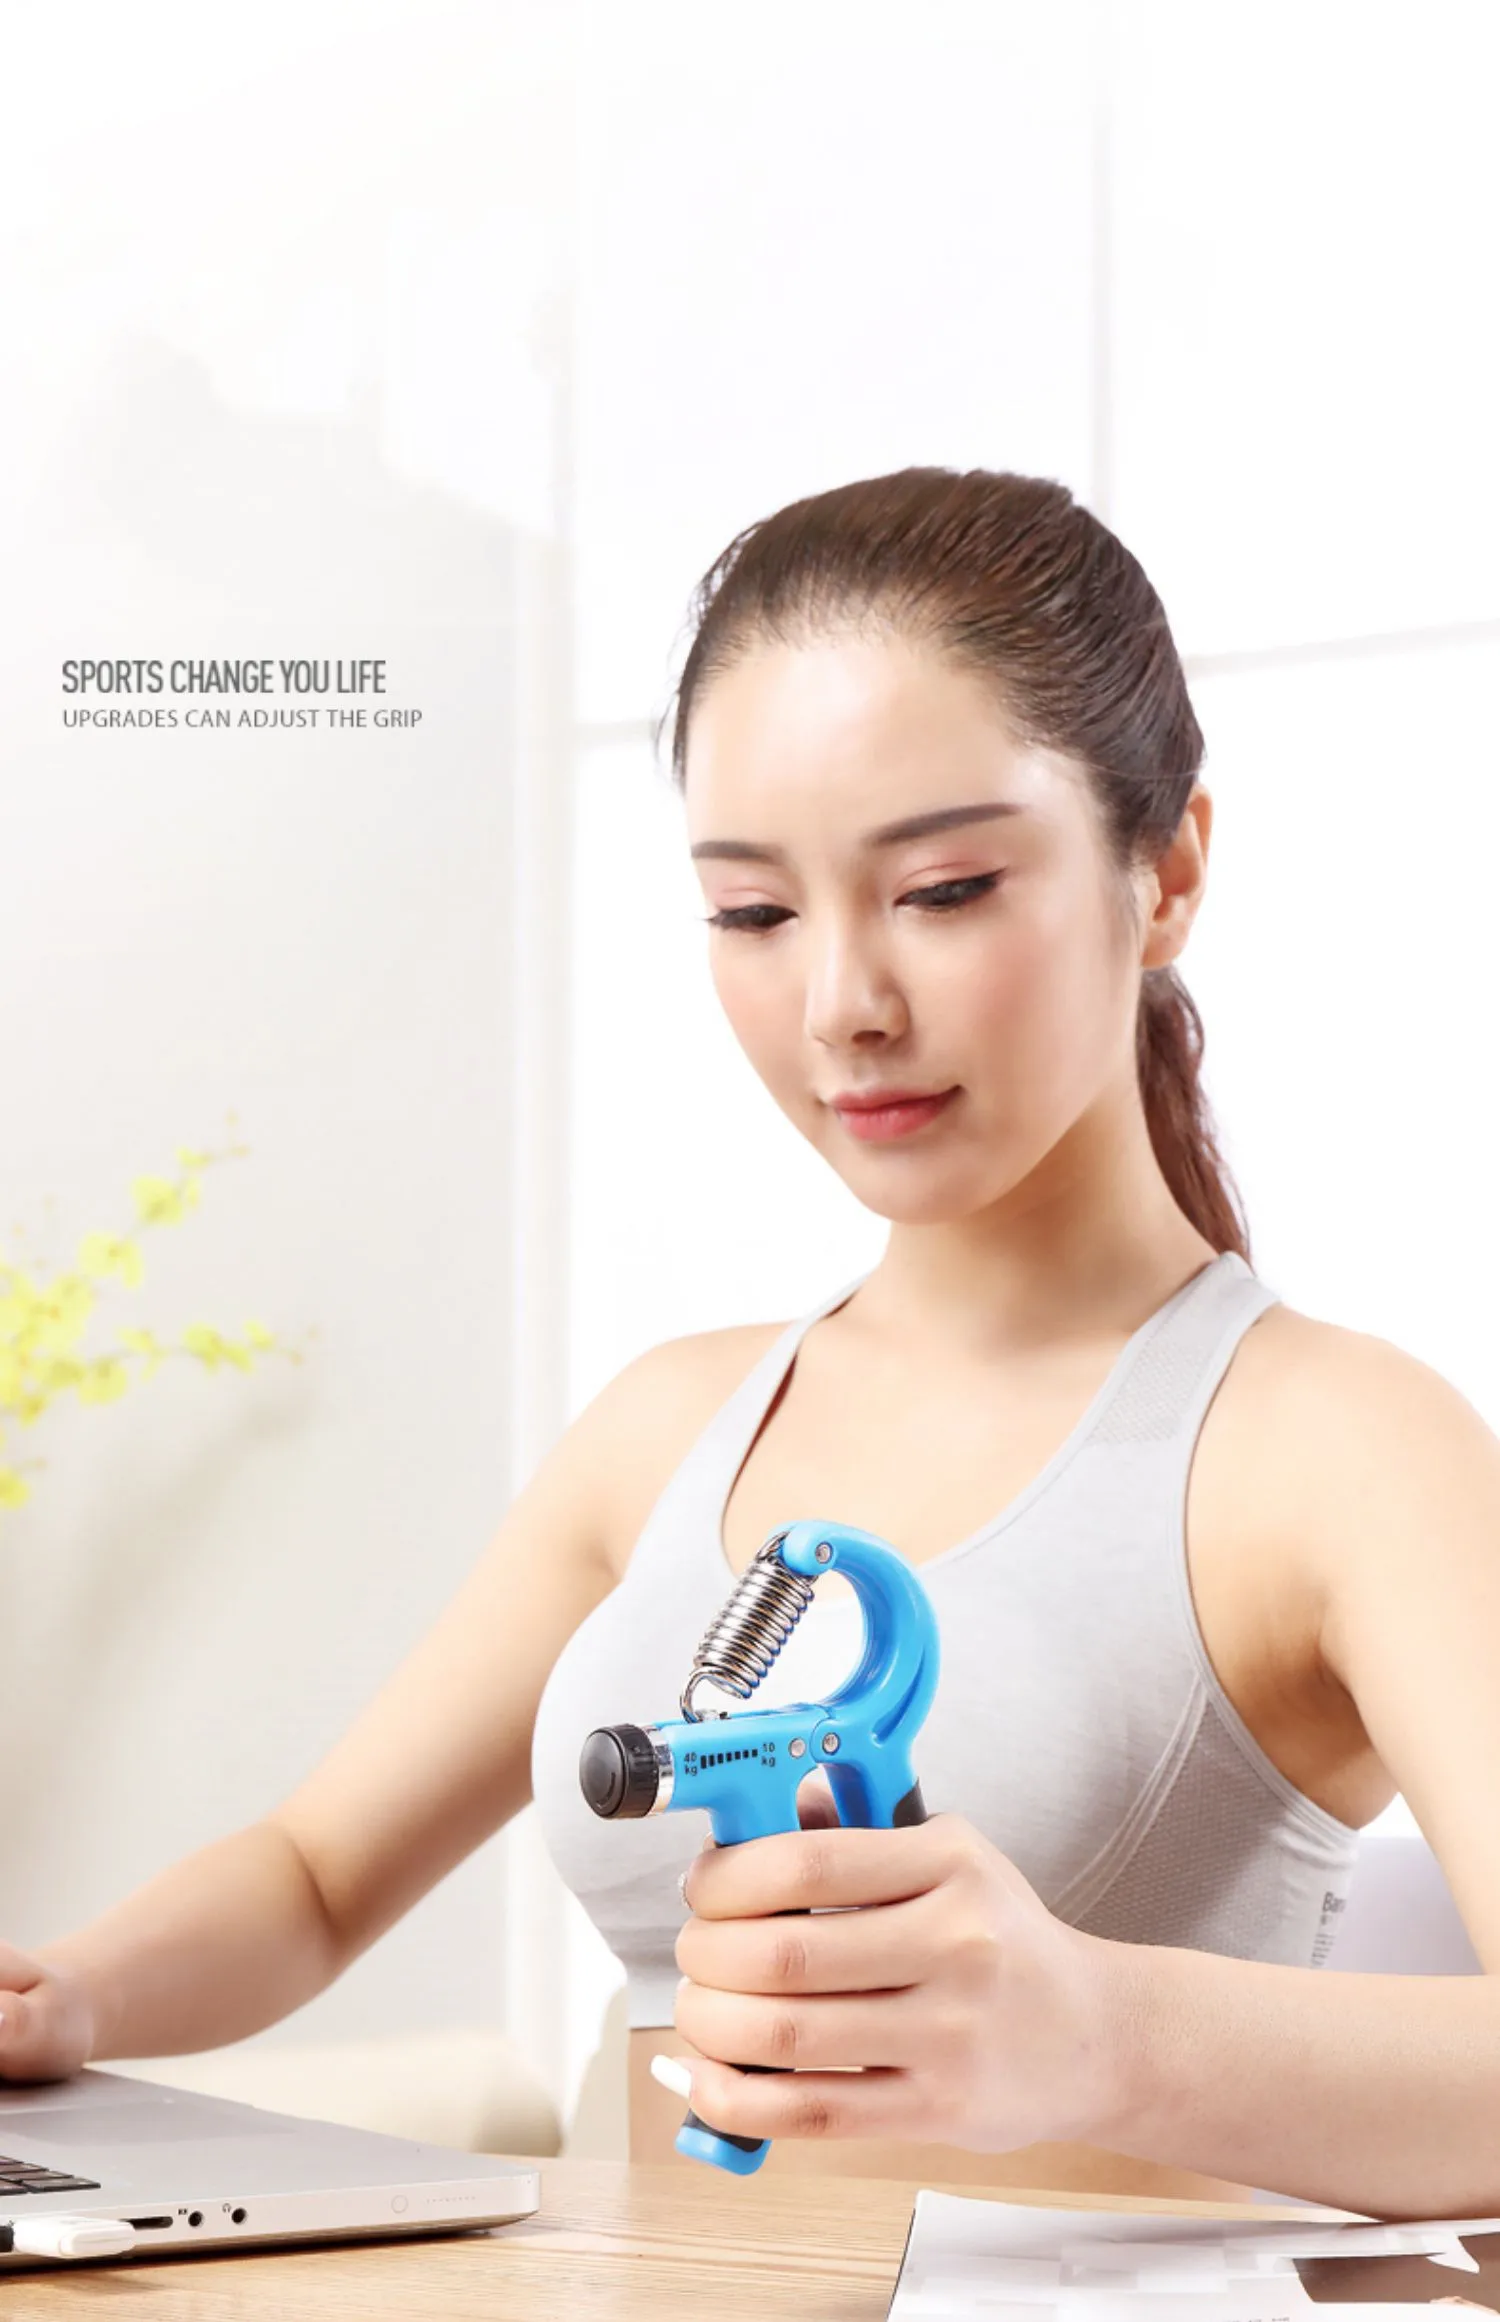 Fitness equipment manufacturers direct hand grip device